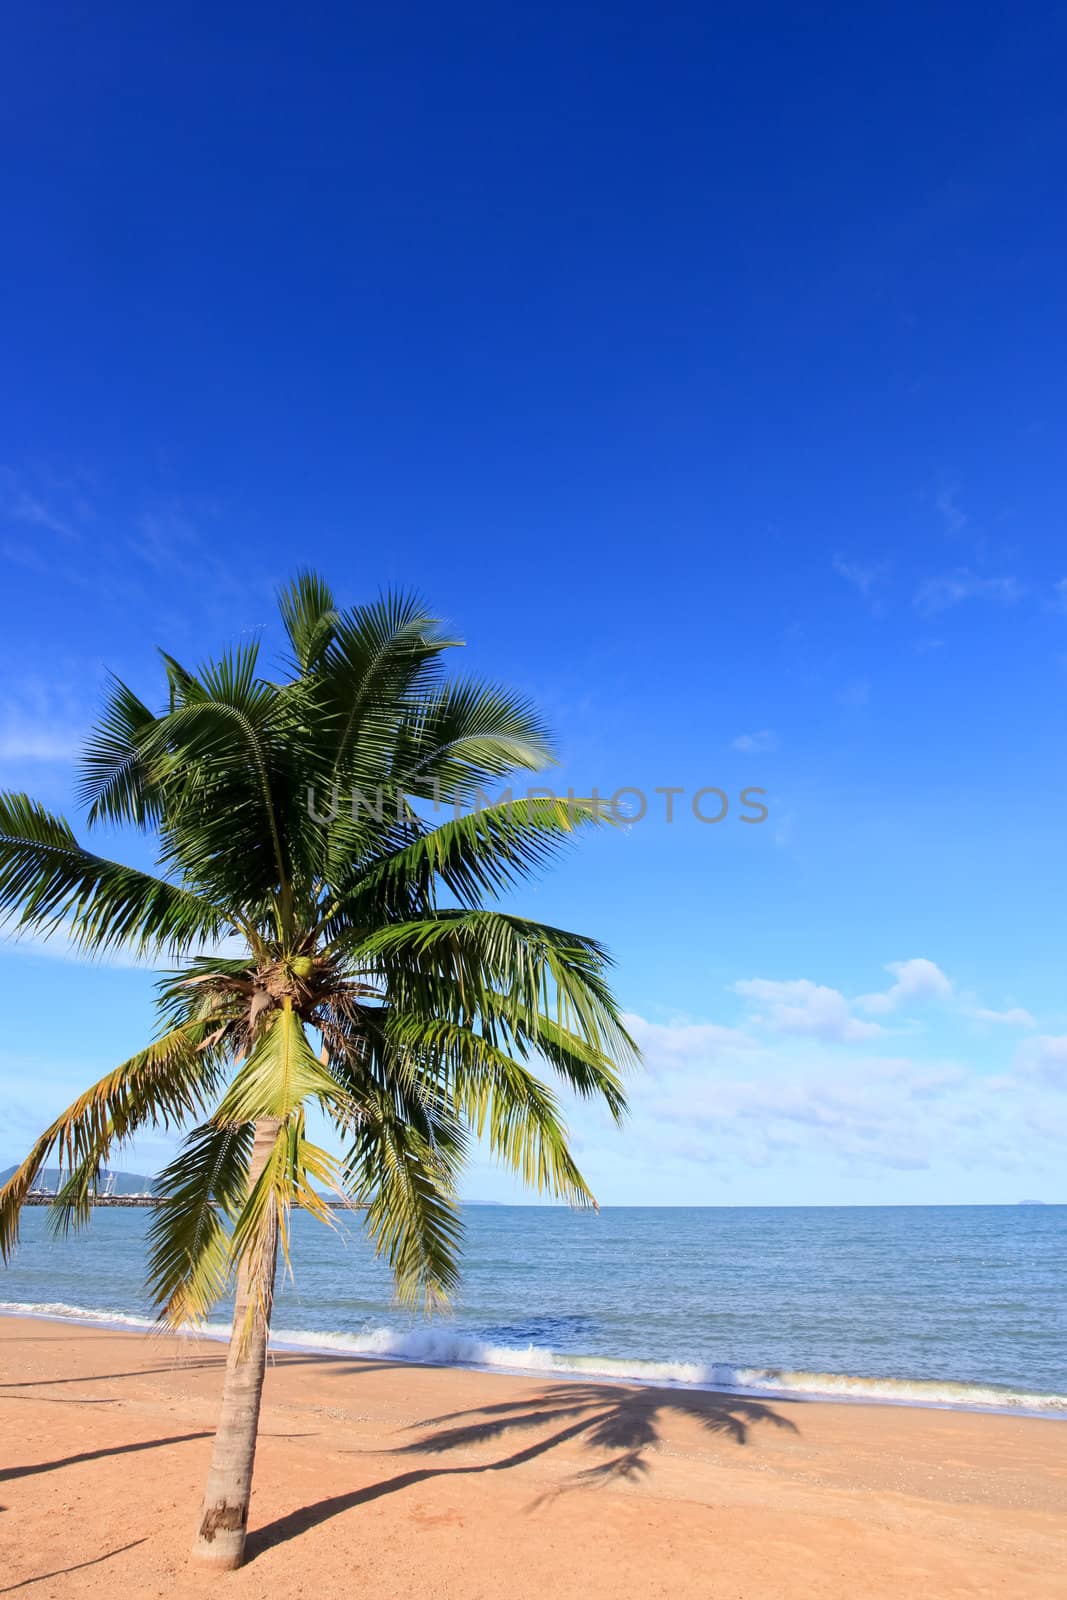 in the morning beach and sigle Coconut plan with  blue sky